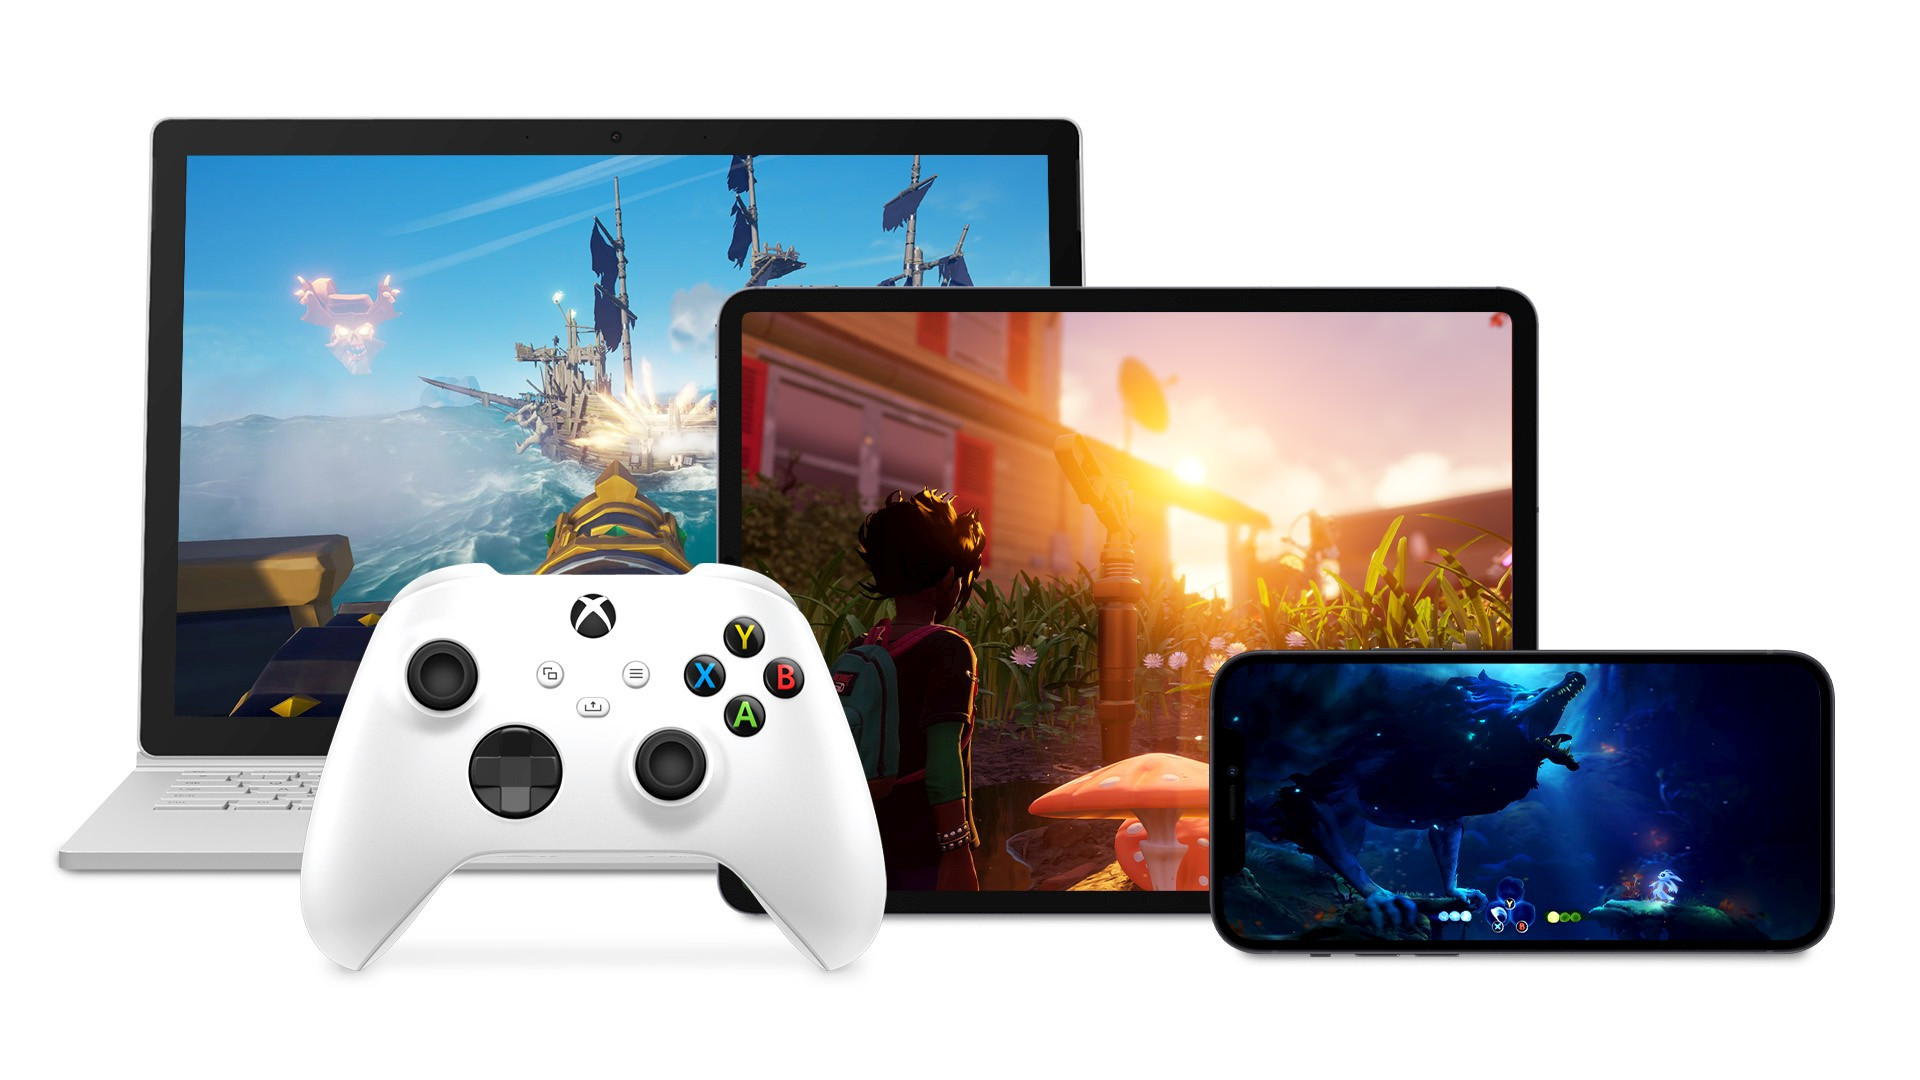 Boosteroid vs Stadia: The Best Cloud Gaming Experience for Your